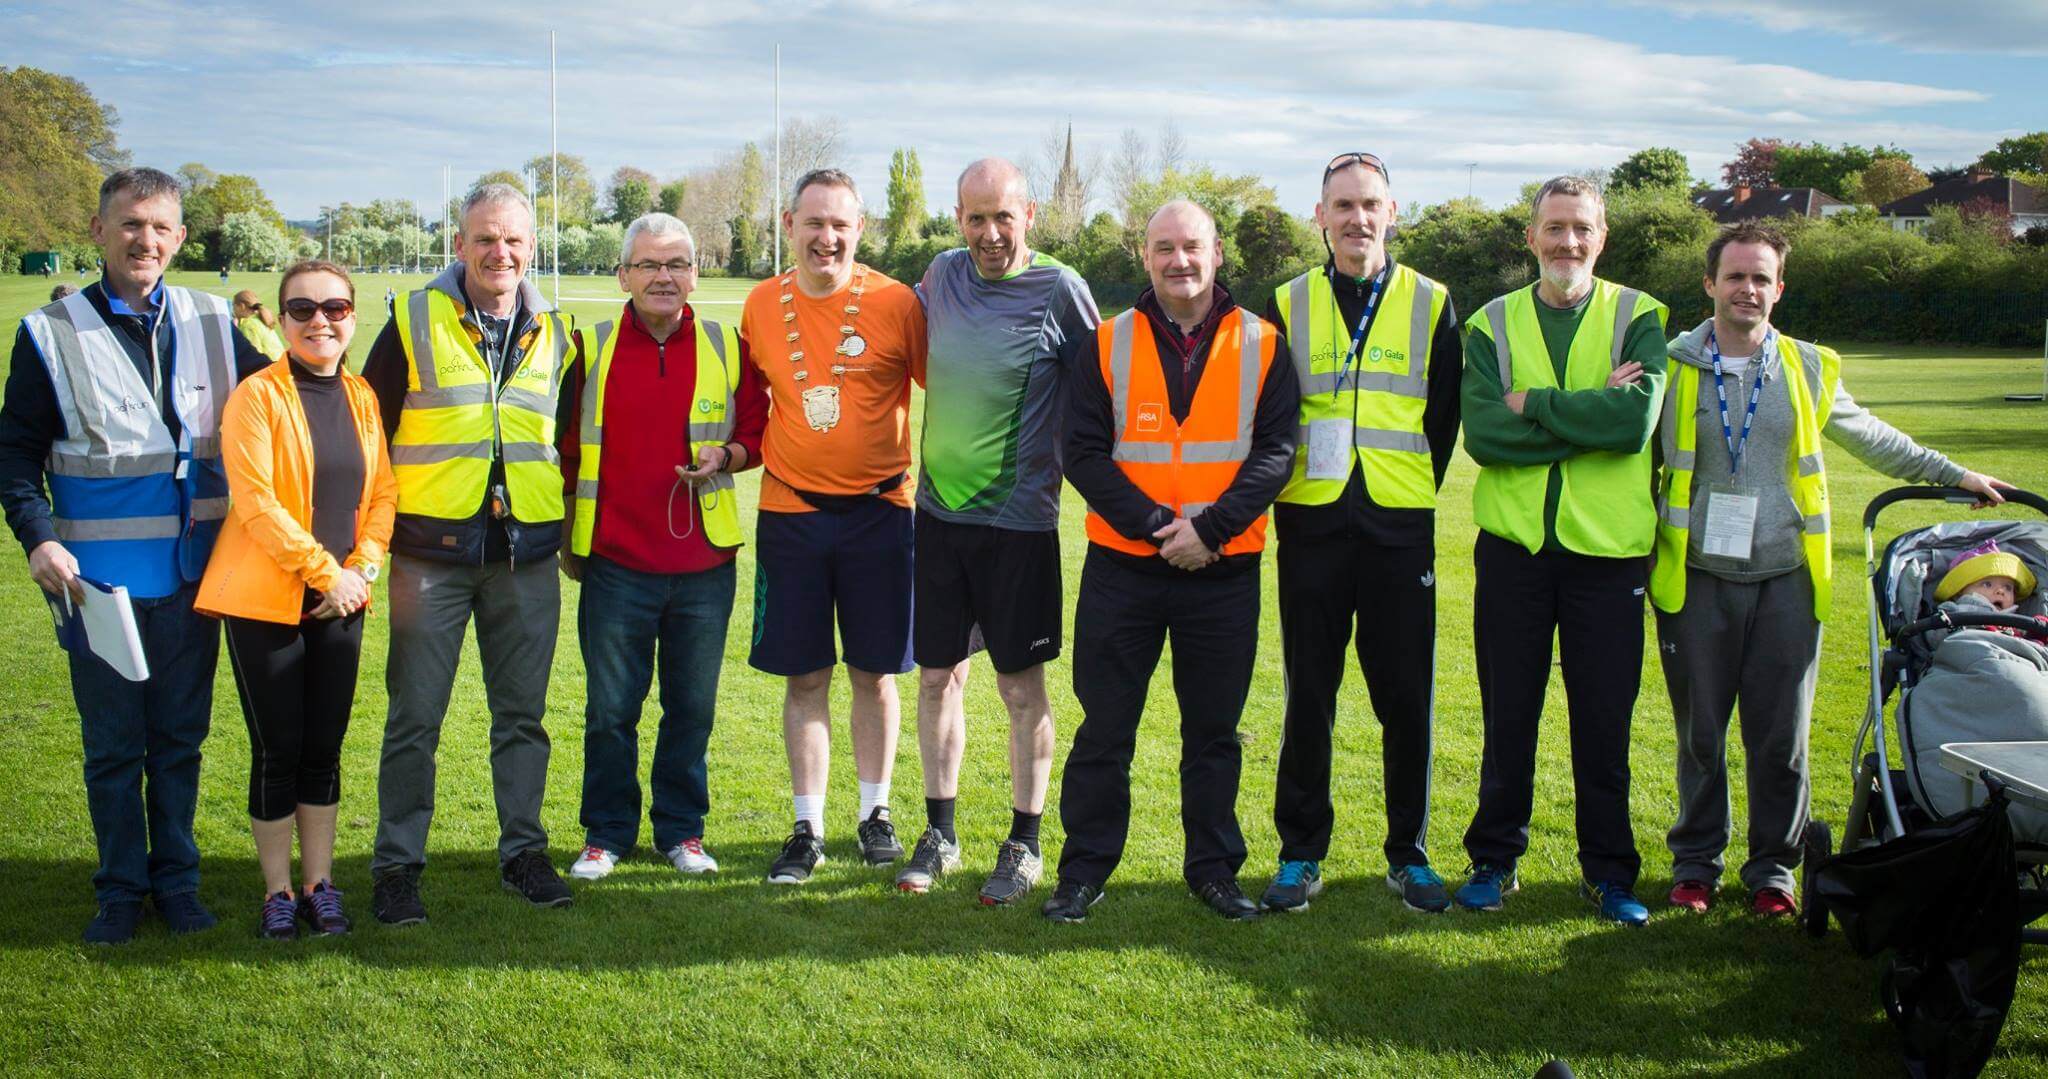 Thirty years on from leaving Pres, Darragh Butler [Class of 1987, 5th from left] is now the Mayor of Fingal County Council. Darragh is setting a fine example for politicians by touring all the parkruns in his constituency. This morning Darragh ran the 5K Malahide parkrun course. Also in the picture is PPU President for 2017 Brian Quigley who is a regular runner / volunteer at Malahide parkrun.